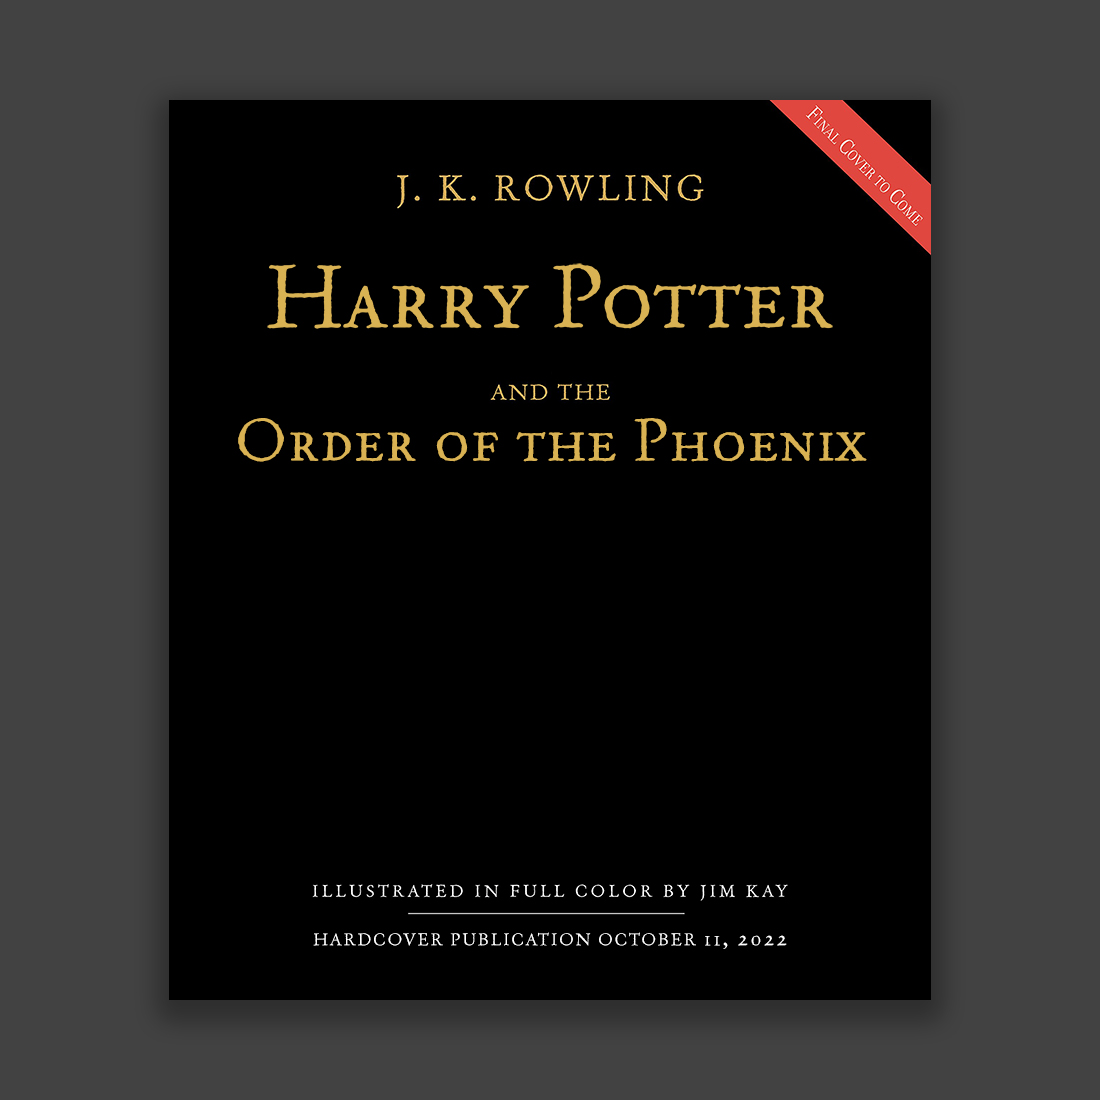 harry potter illustrated edition pdf download